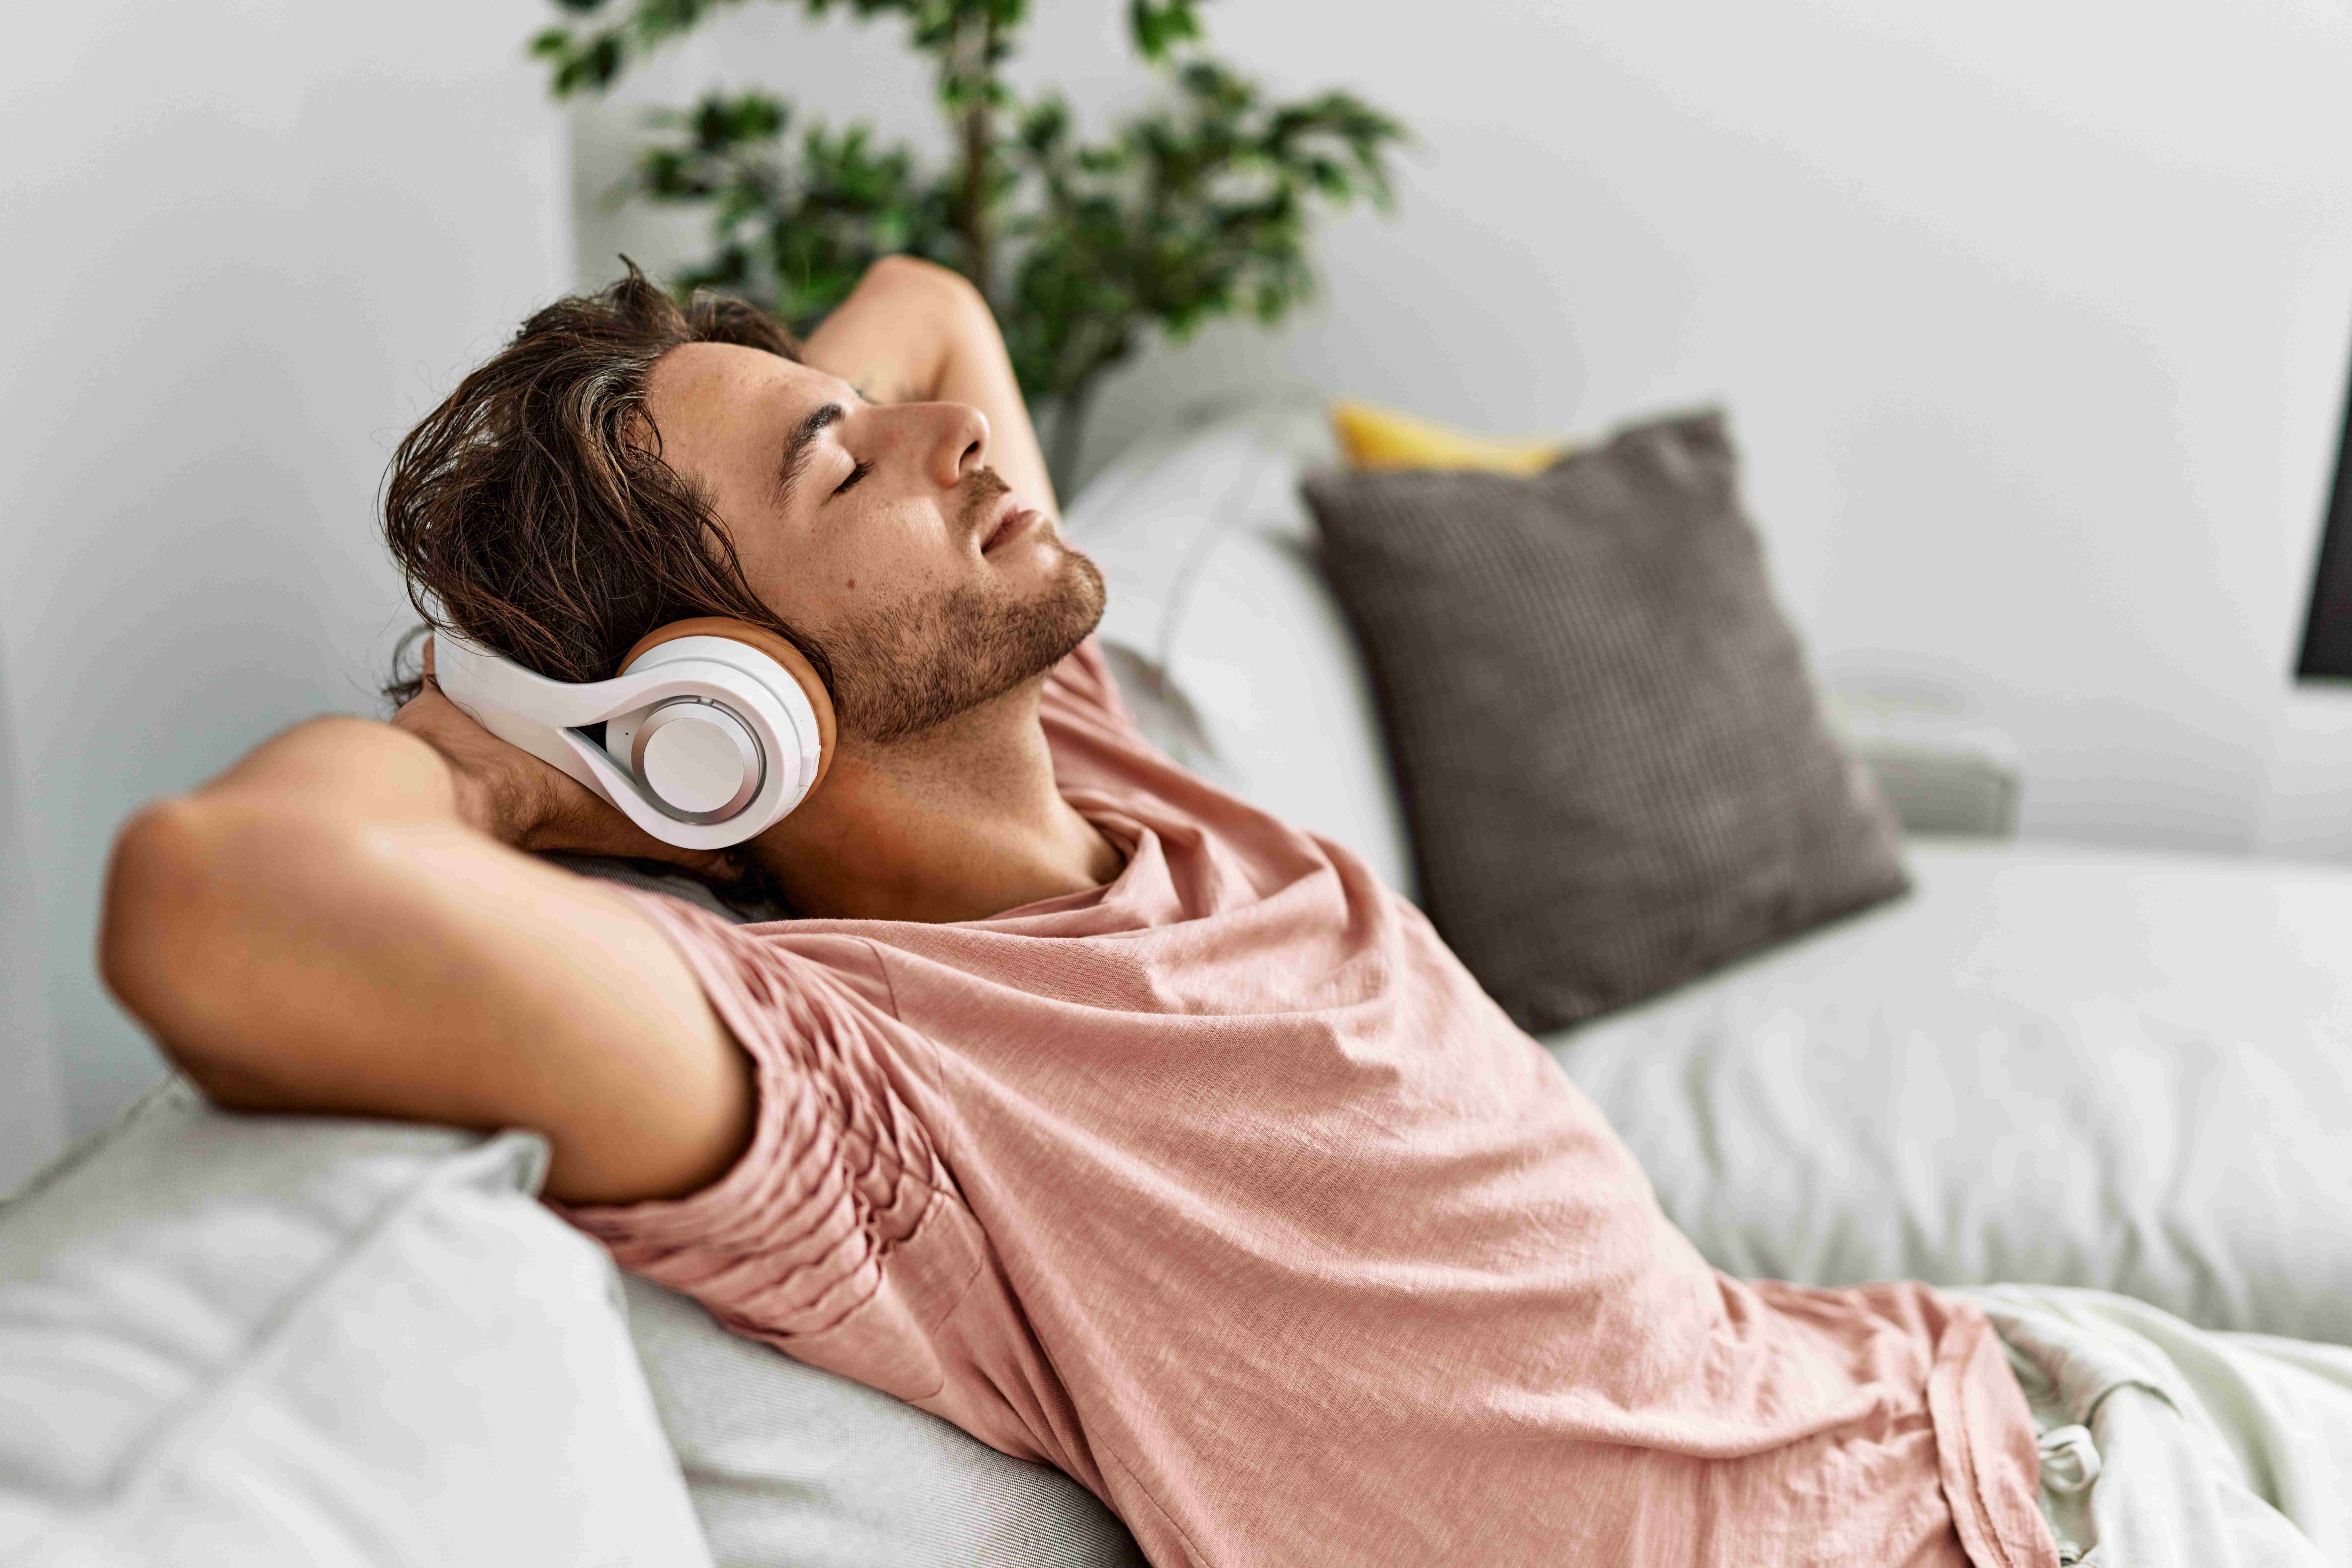 A college graduate is finally able to relax and listen to music on his headphones.